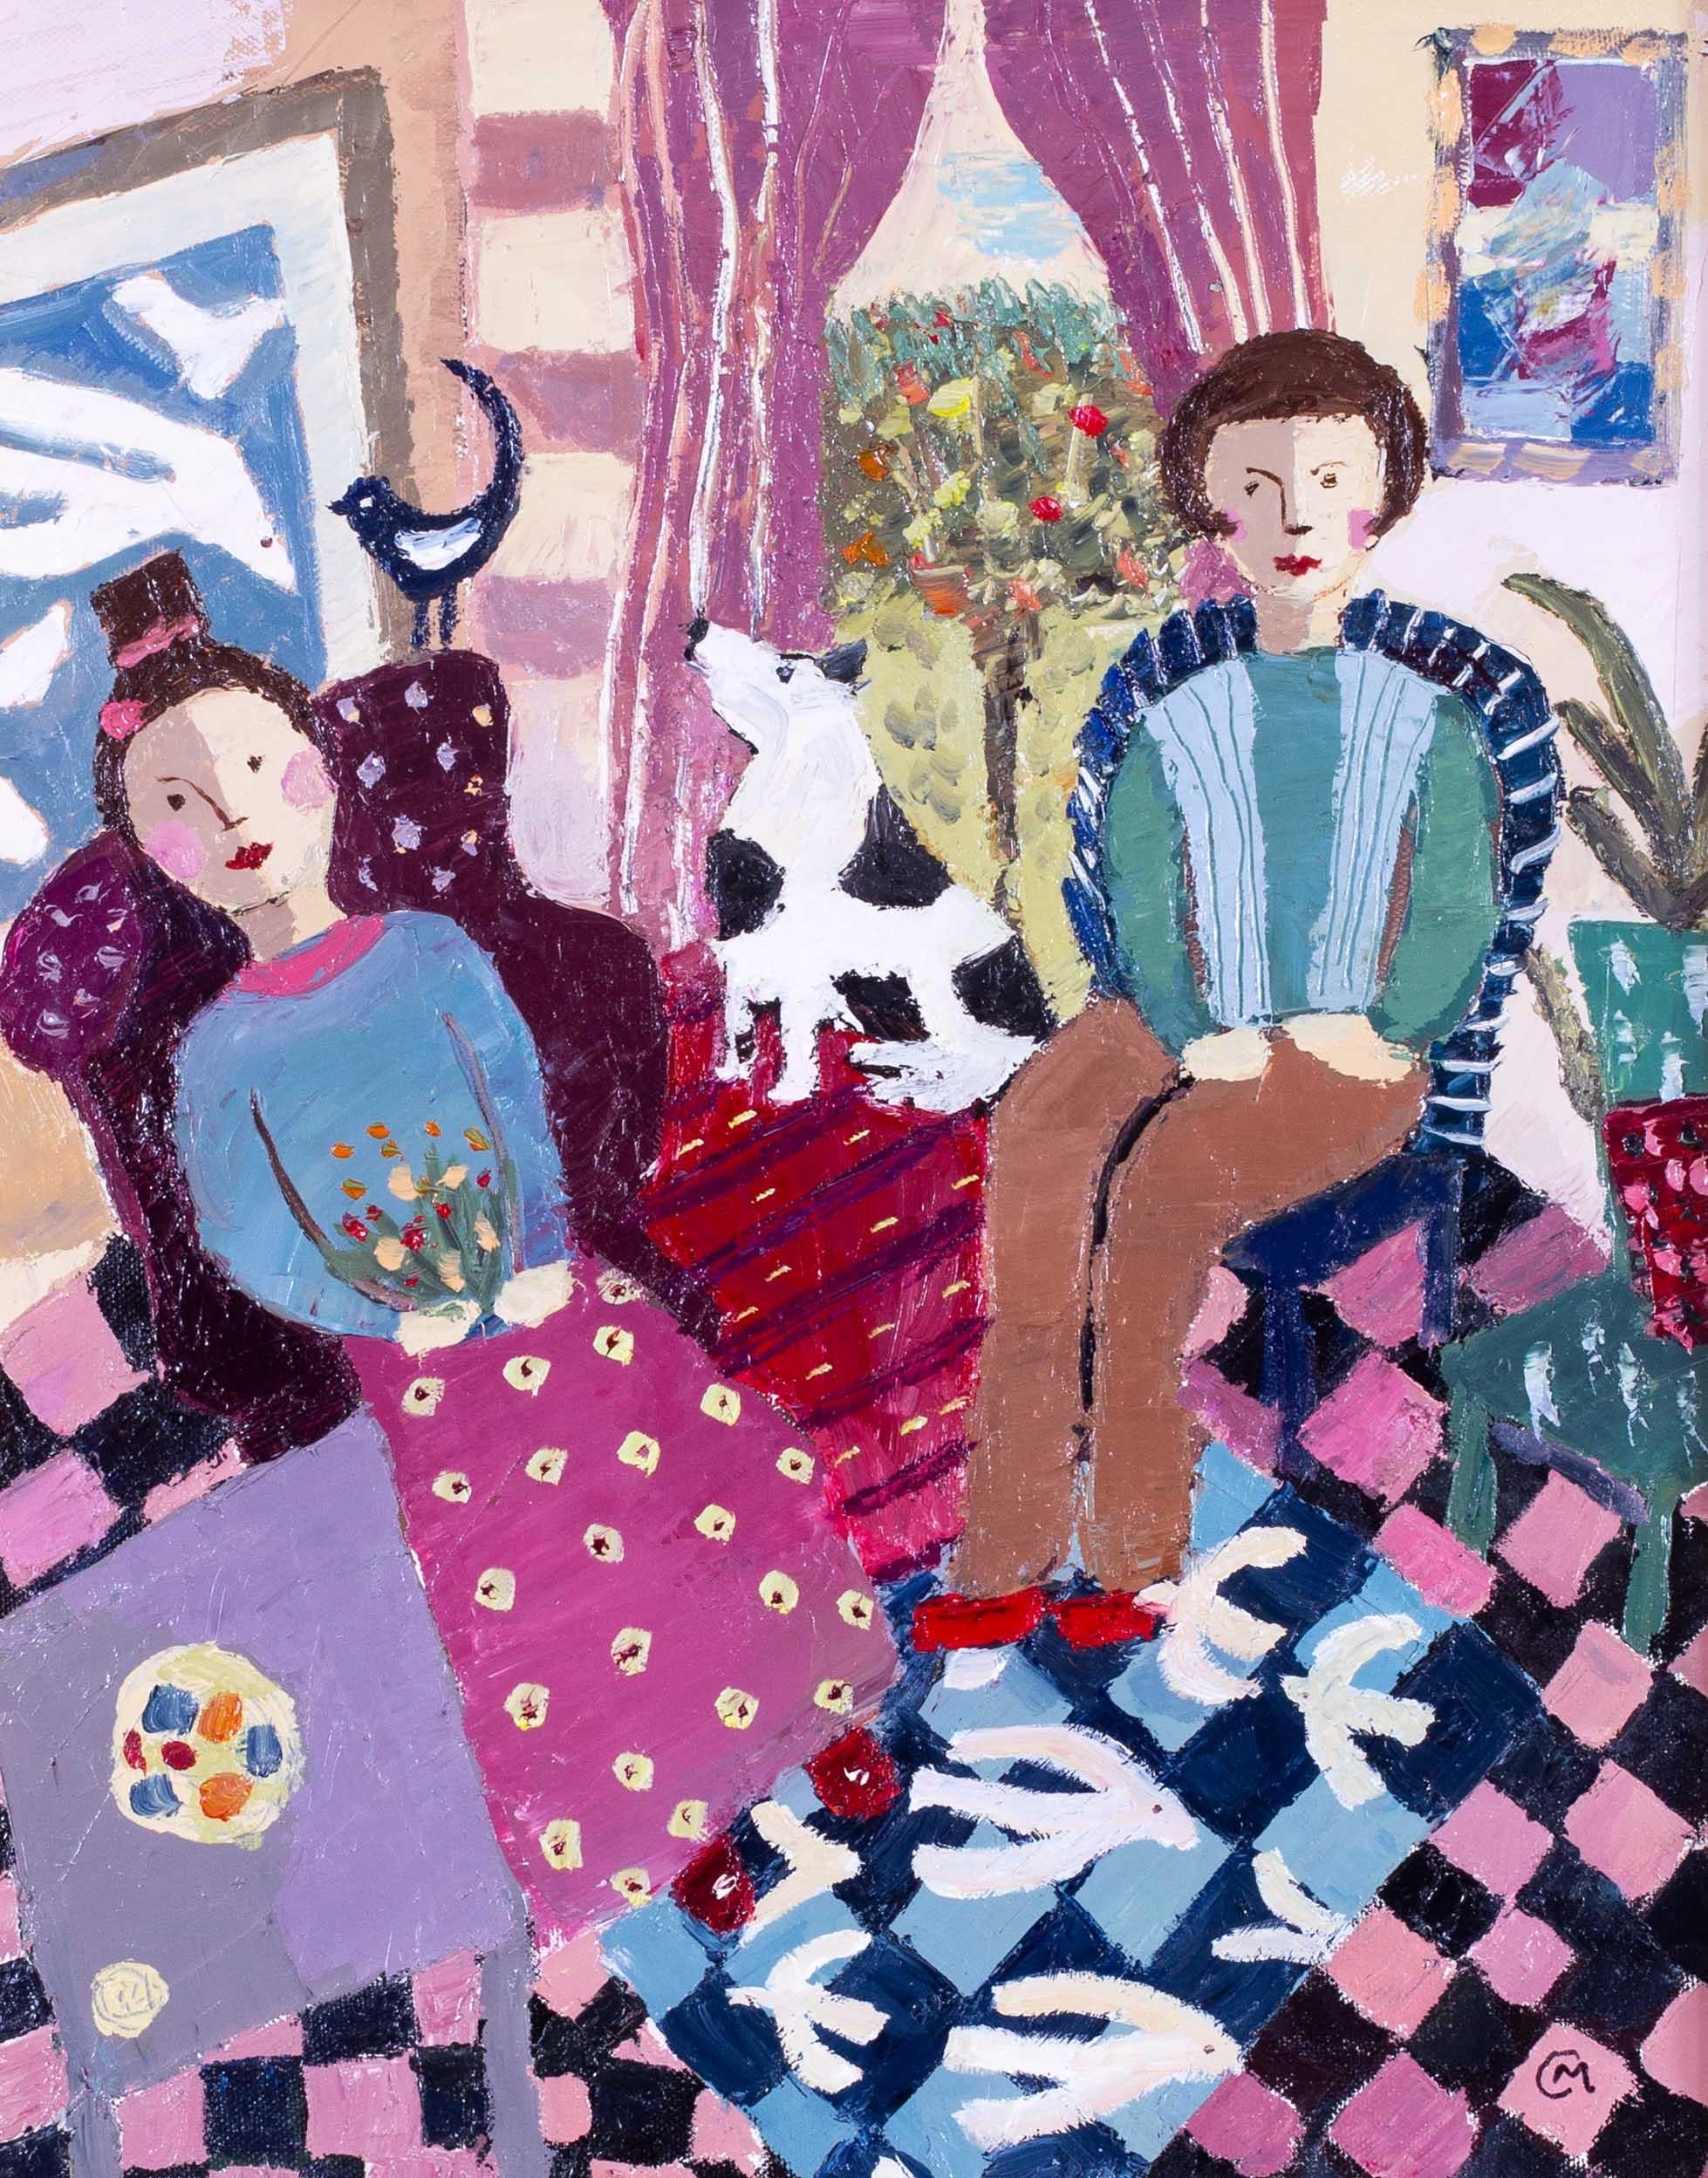 Scottish 20th Century naive oil painting of figures, dogs and birds in interior - Painting by Catriona Millar